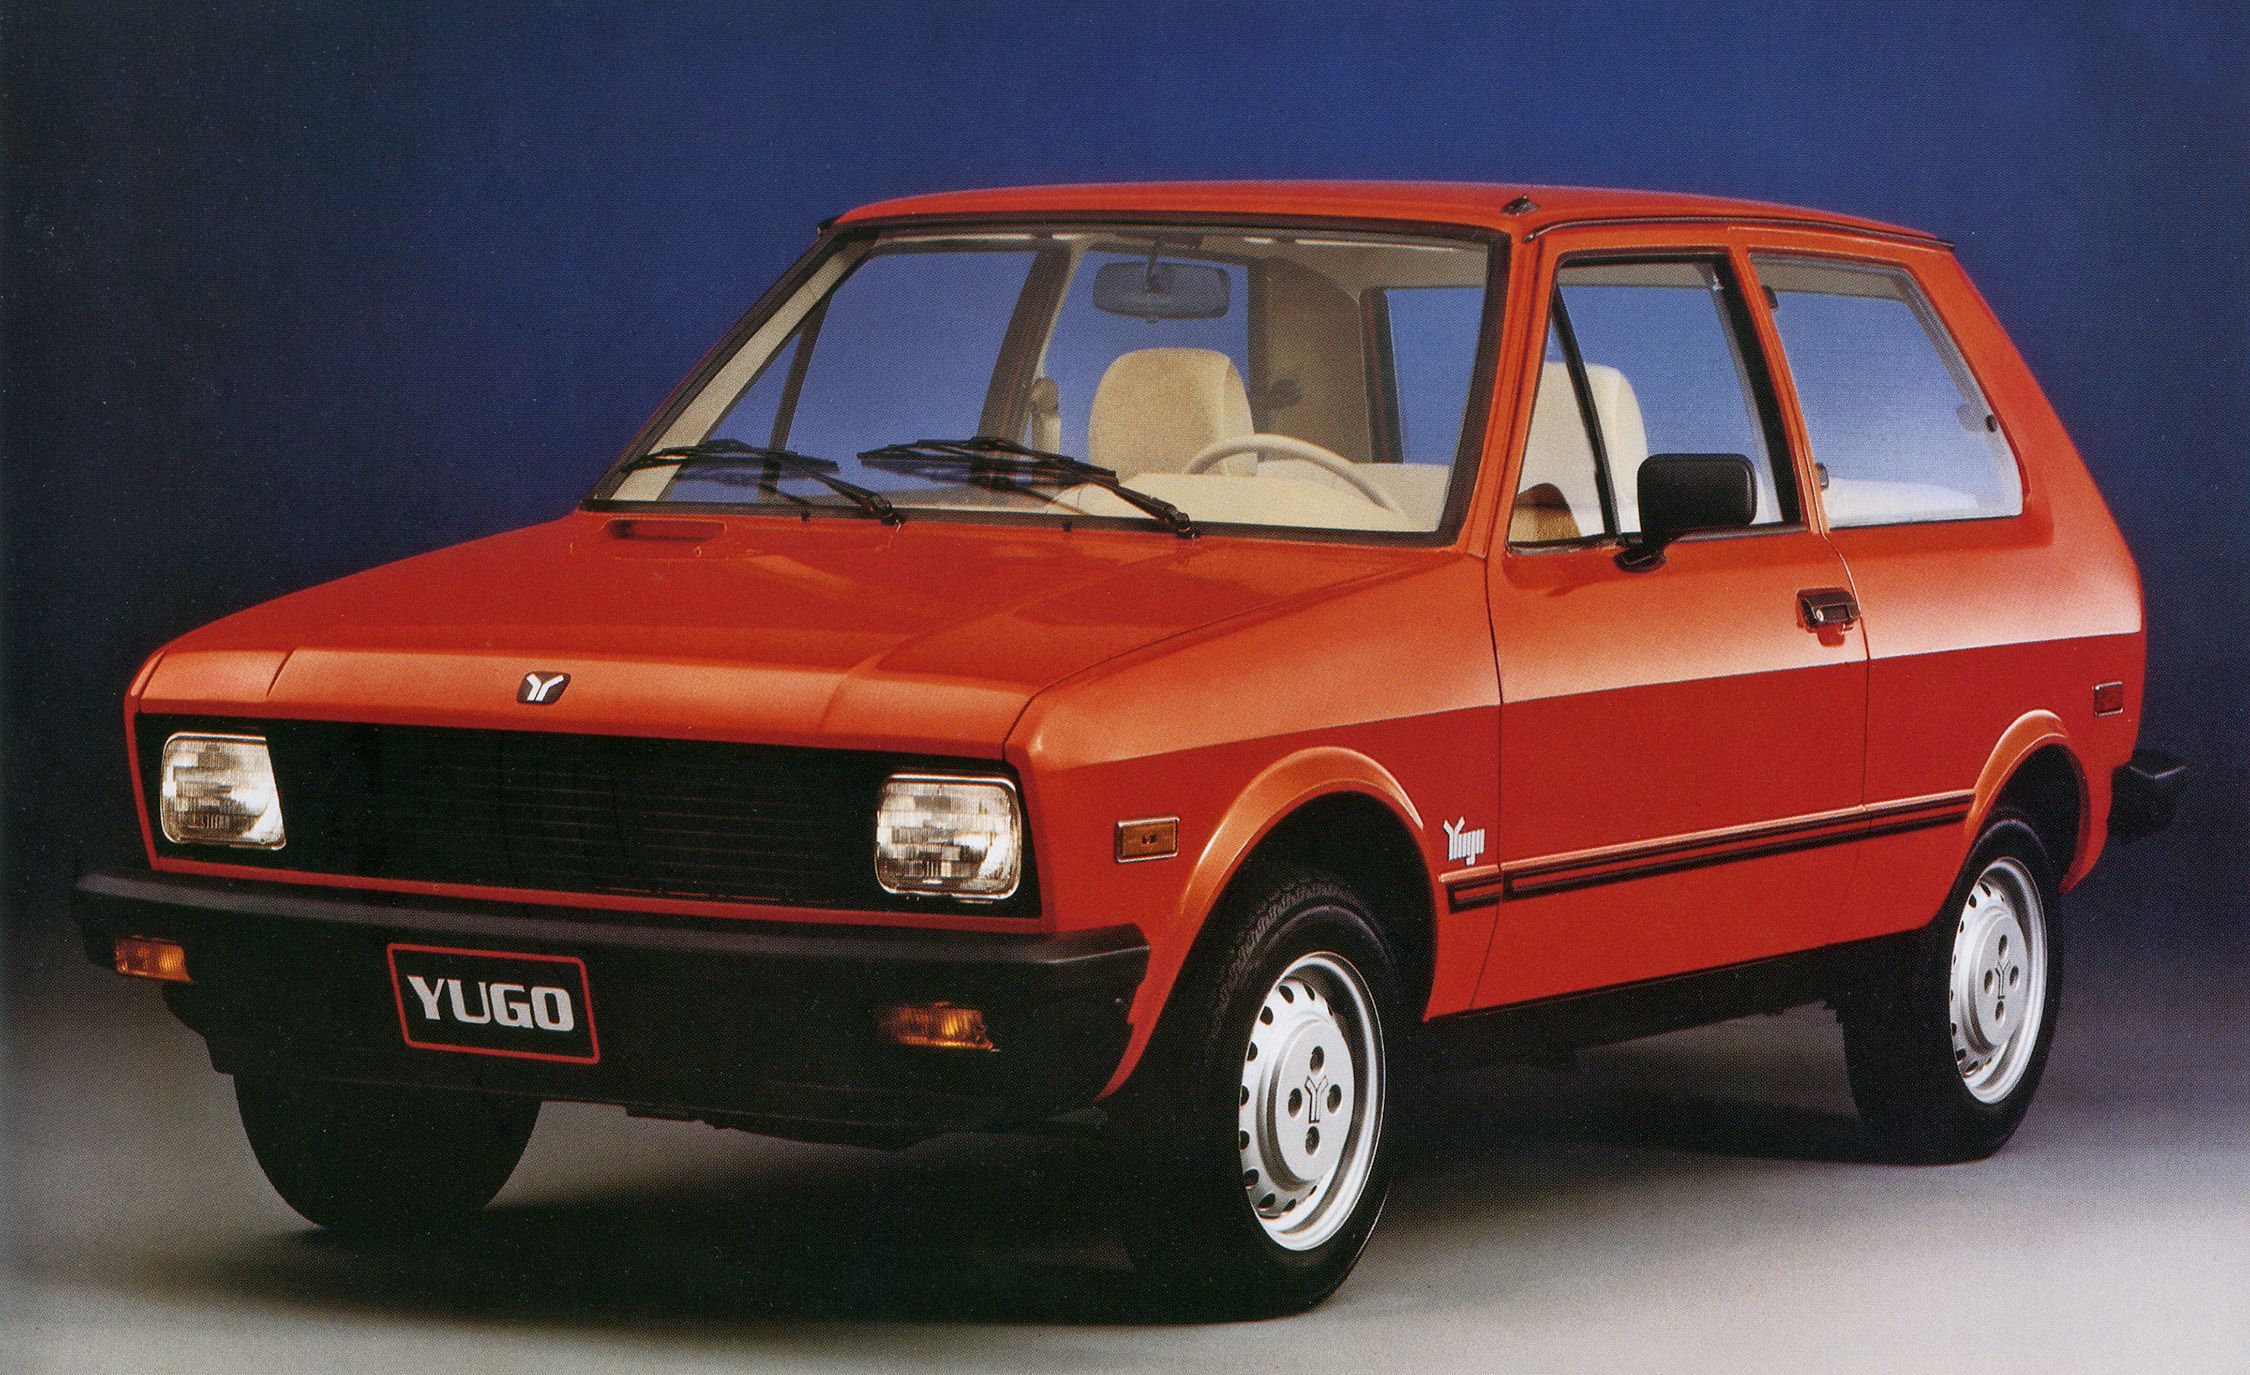 A Quick Look At The Yugo The Worst Car In History